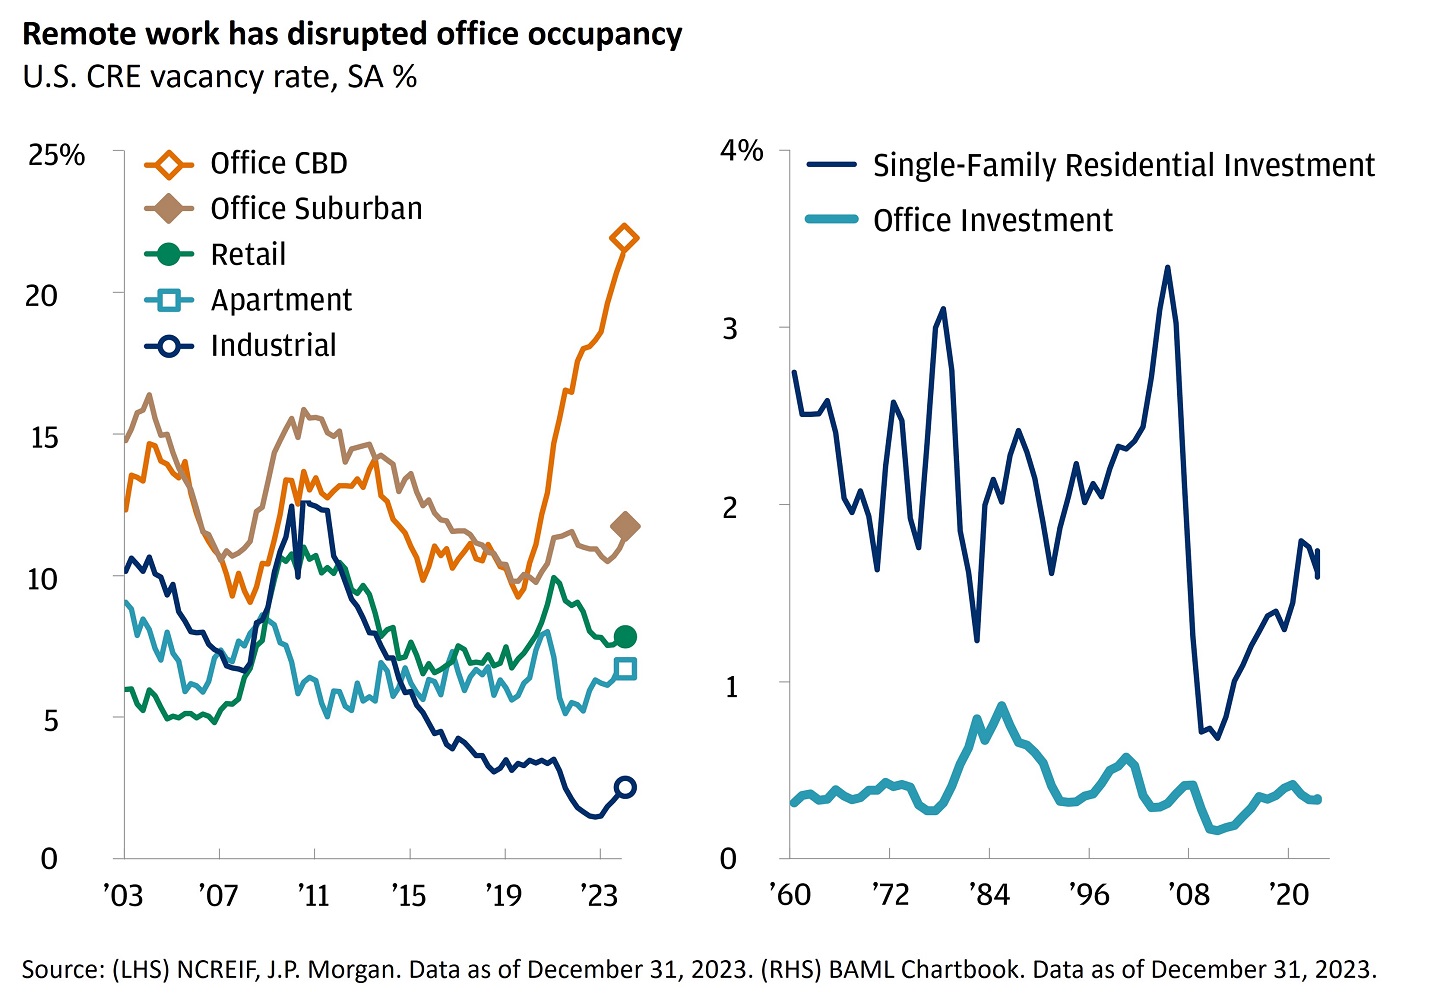 This left chart shows U.S. CRE vacancy rates, from 2006 to 2023 for apartment, office CBD, industrial, office suburban, and retail CRE.